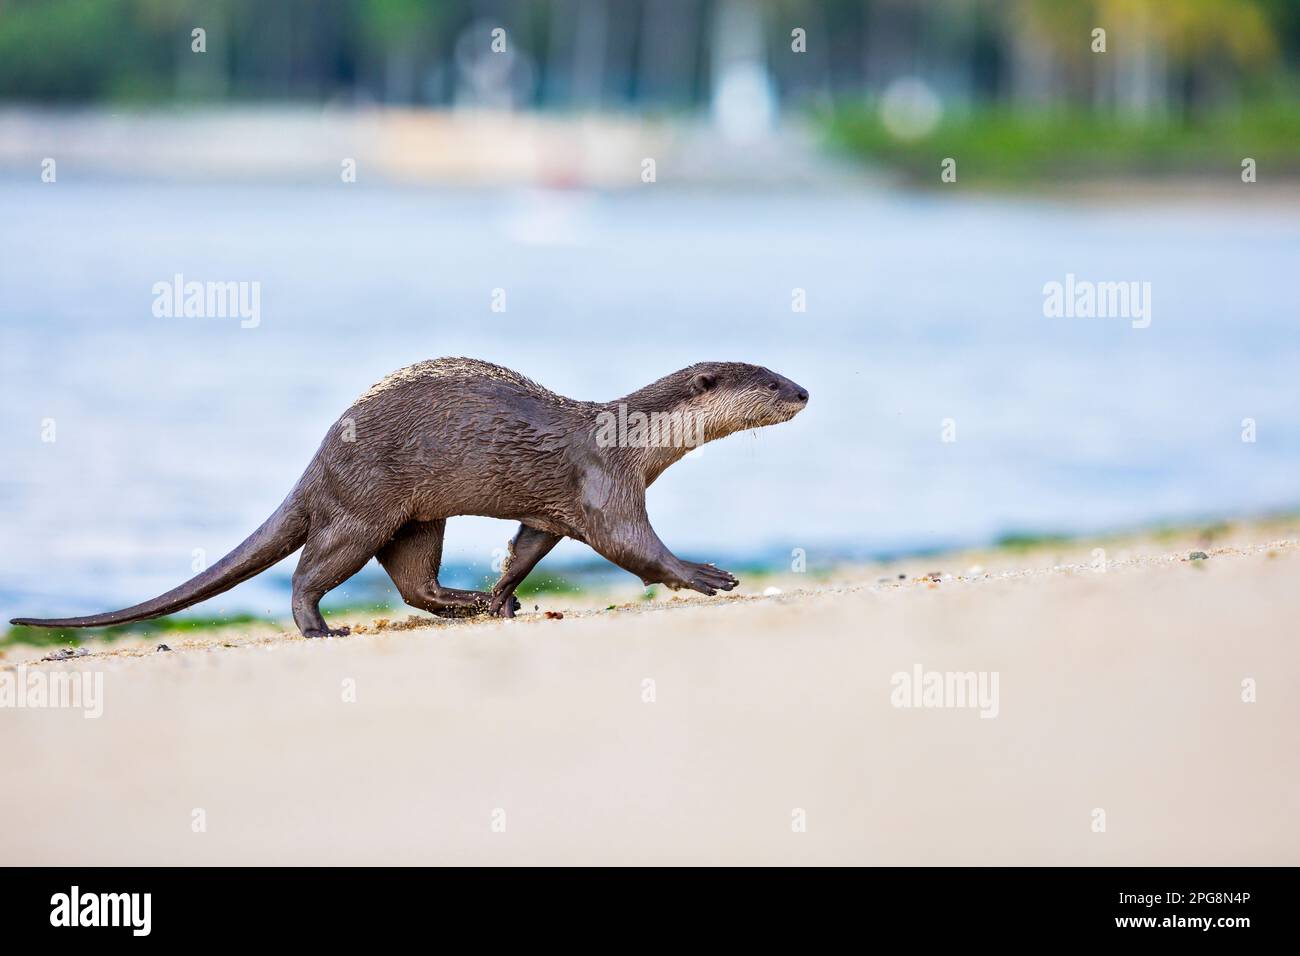 A wet smooth-coated otter runs onto a beach after fishing in the sea, Singapore. Stock Photo